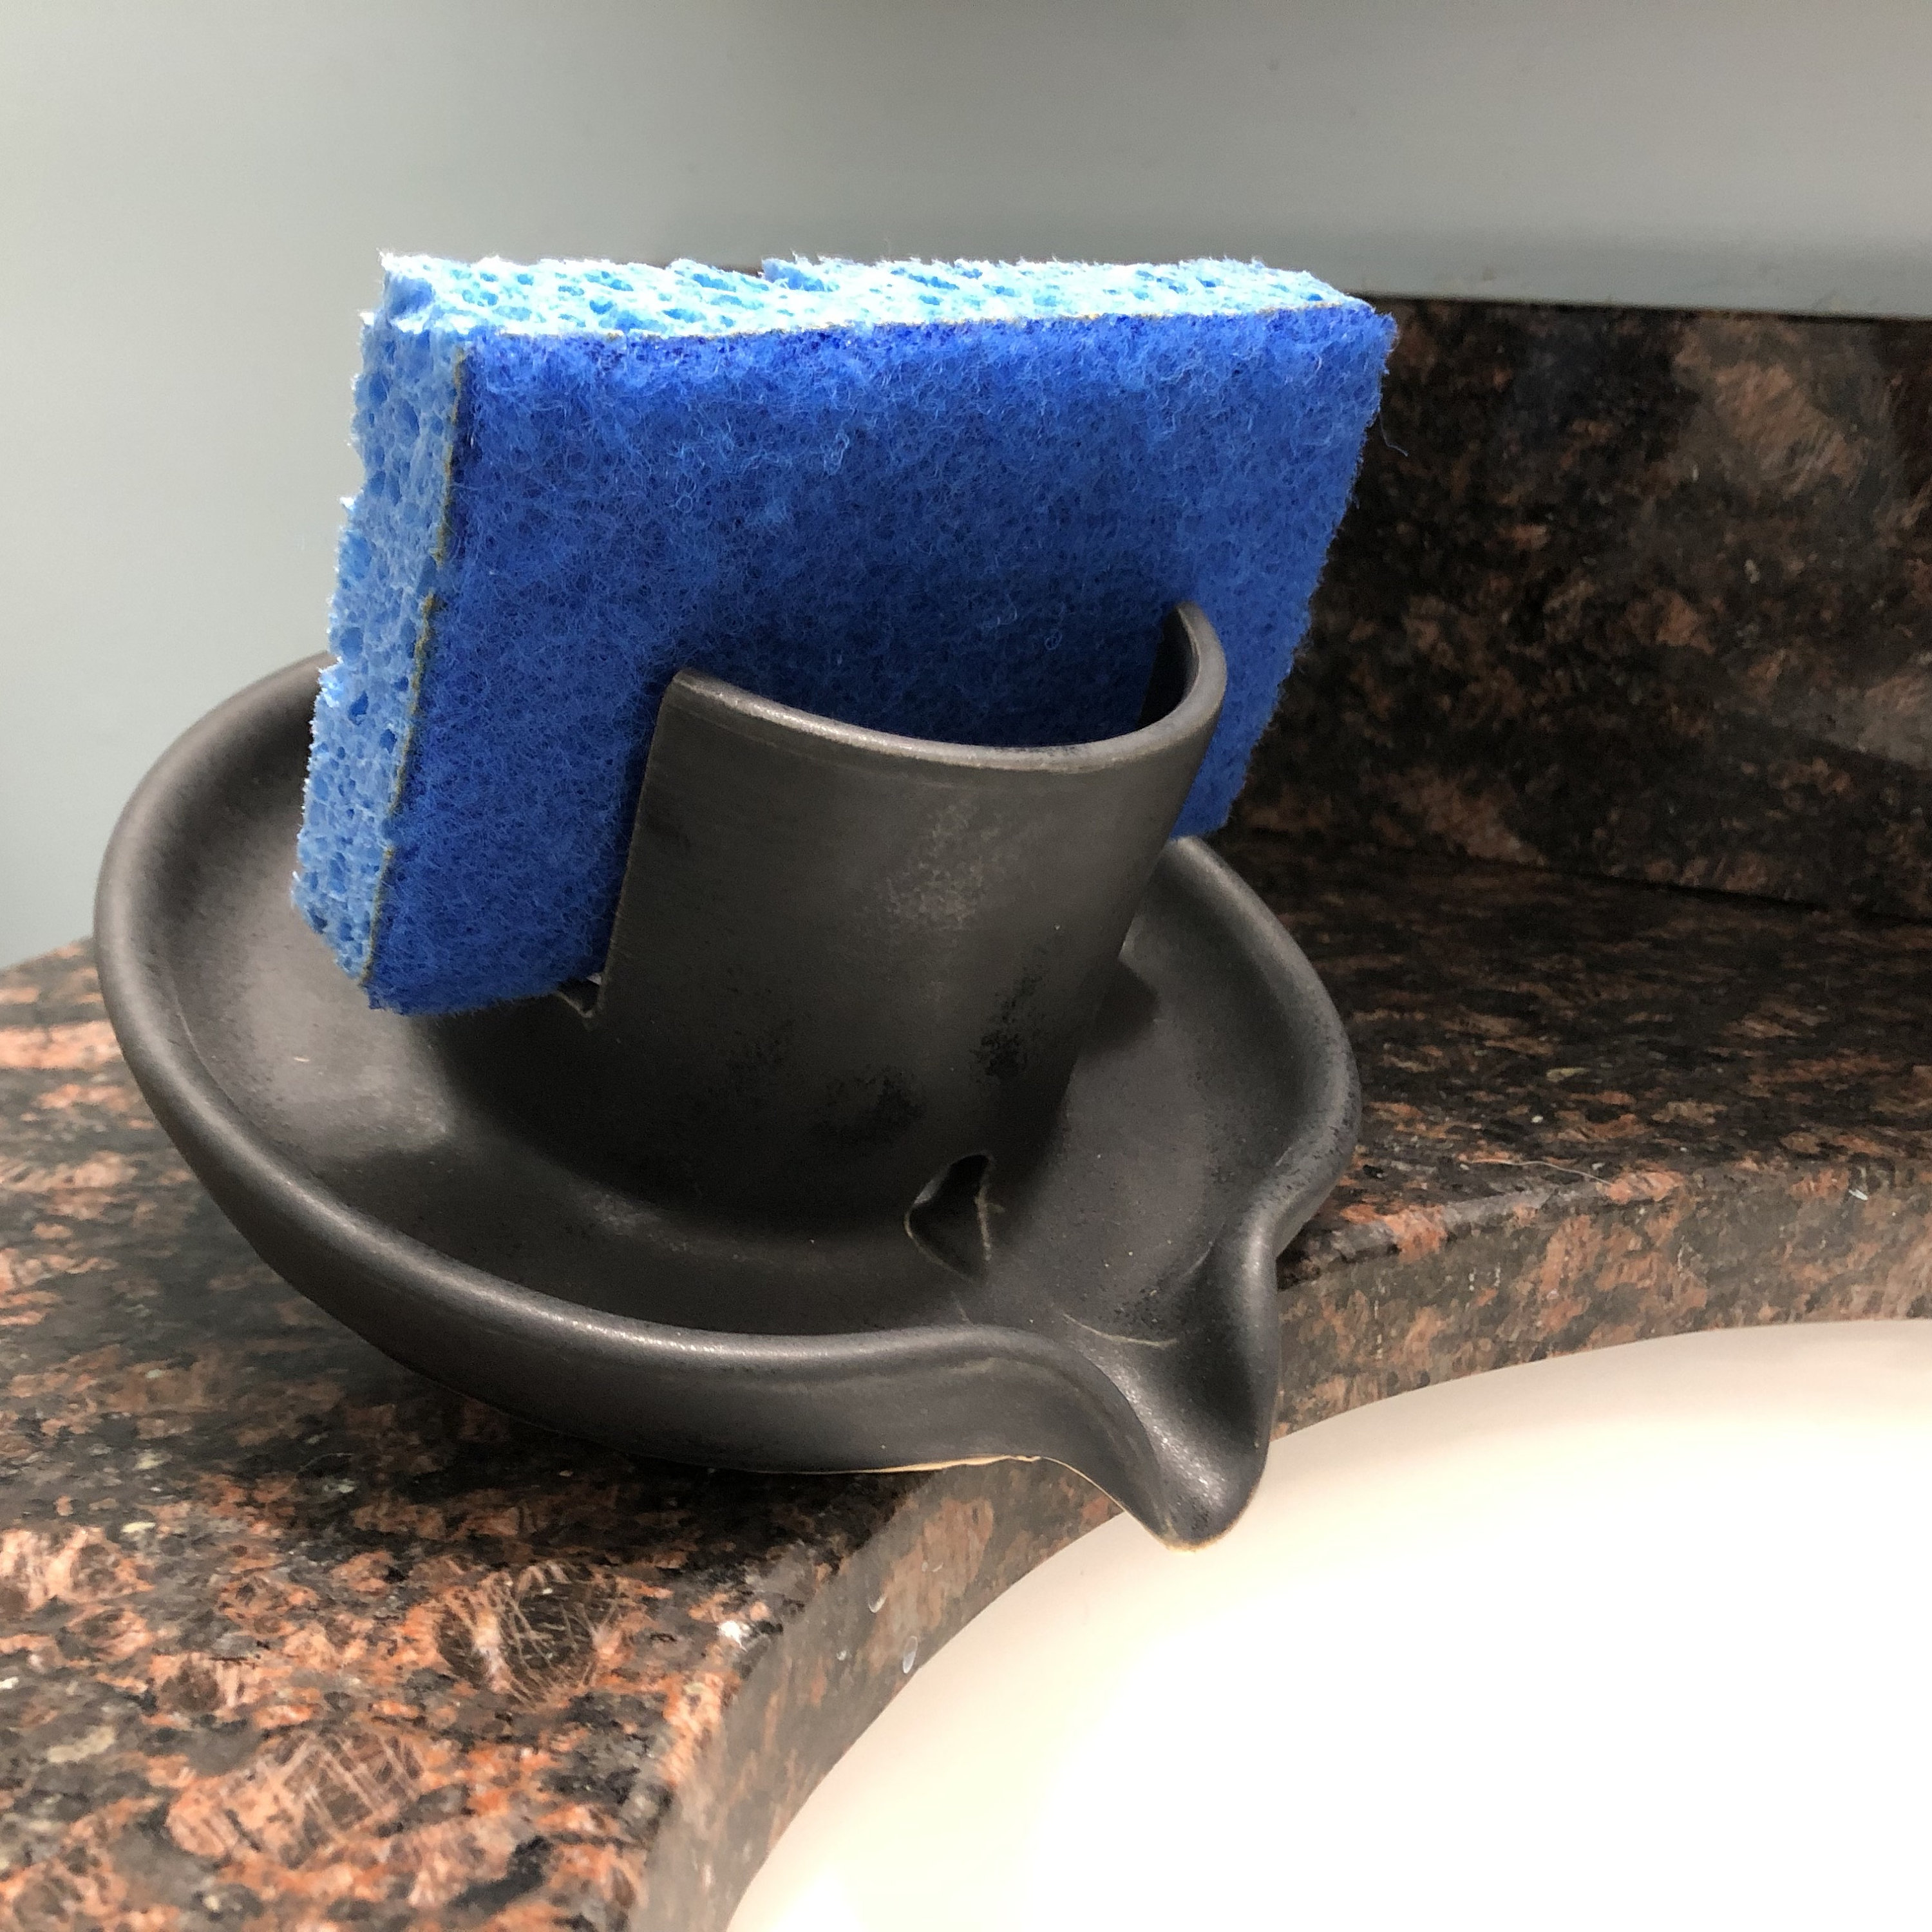 Handcrafted Sponge Holder with Drainer